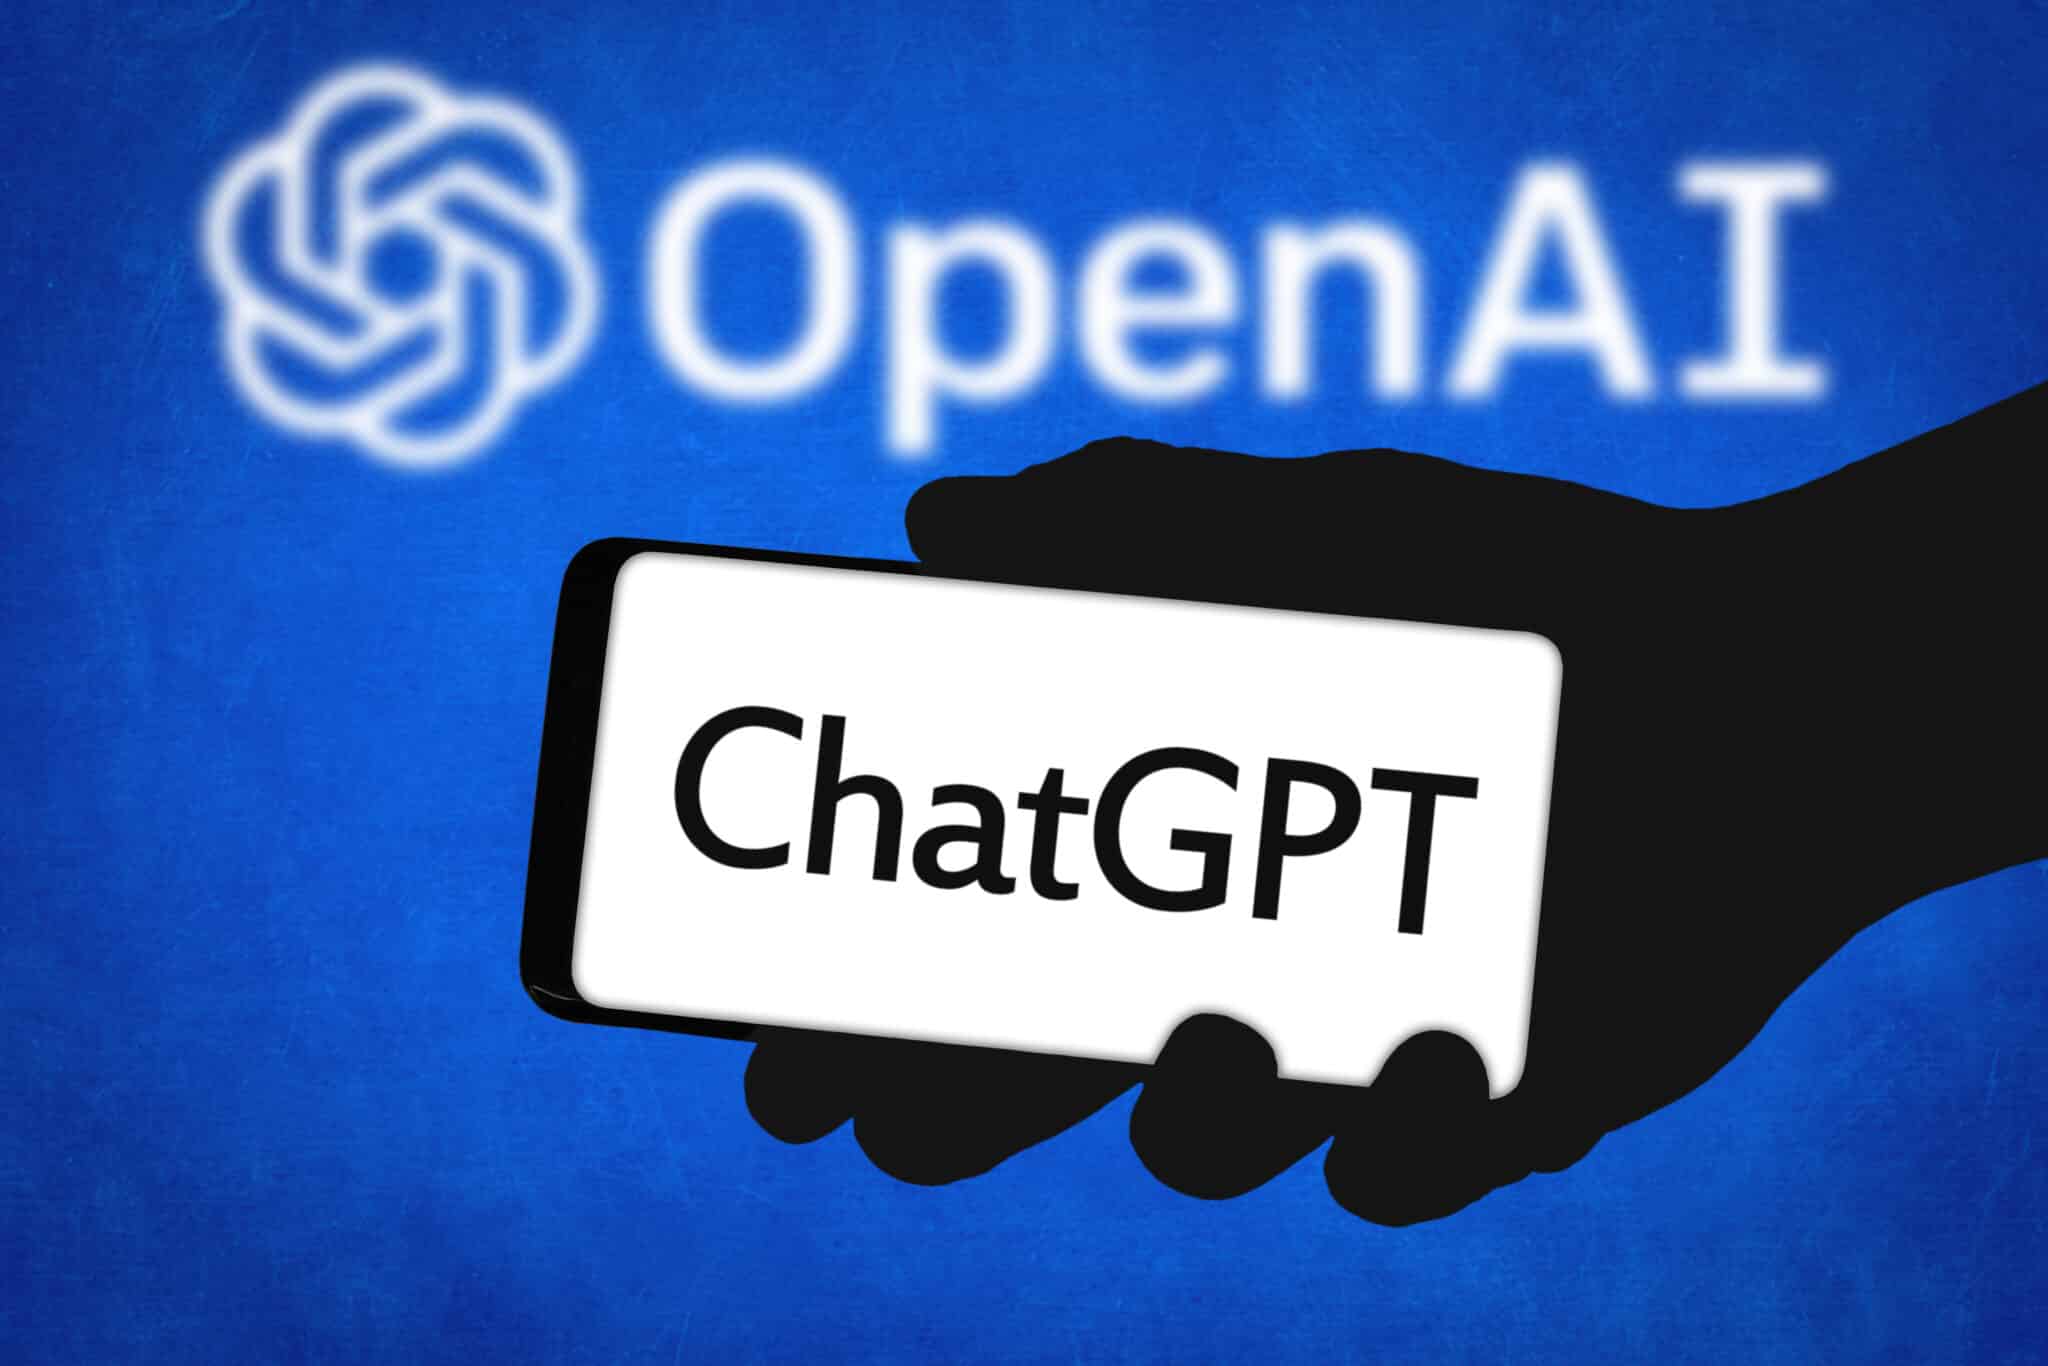 ChatGPT chatbot by OpenAI artificial intelligence